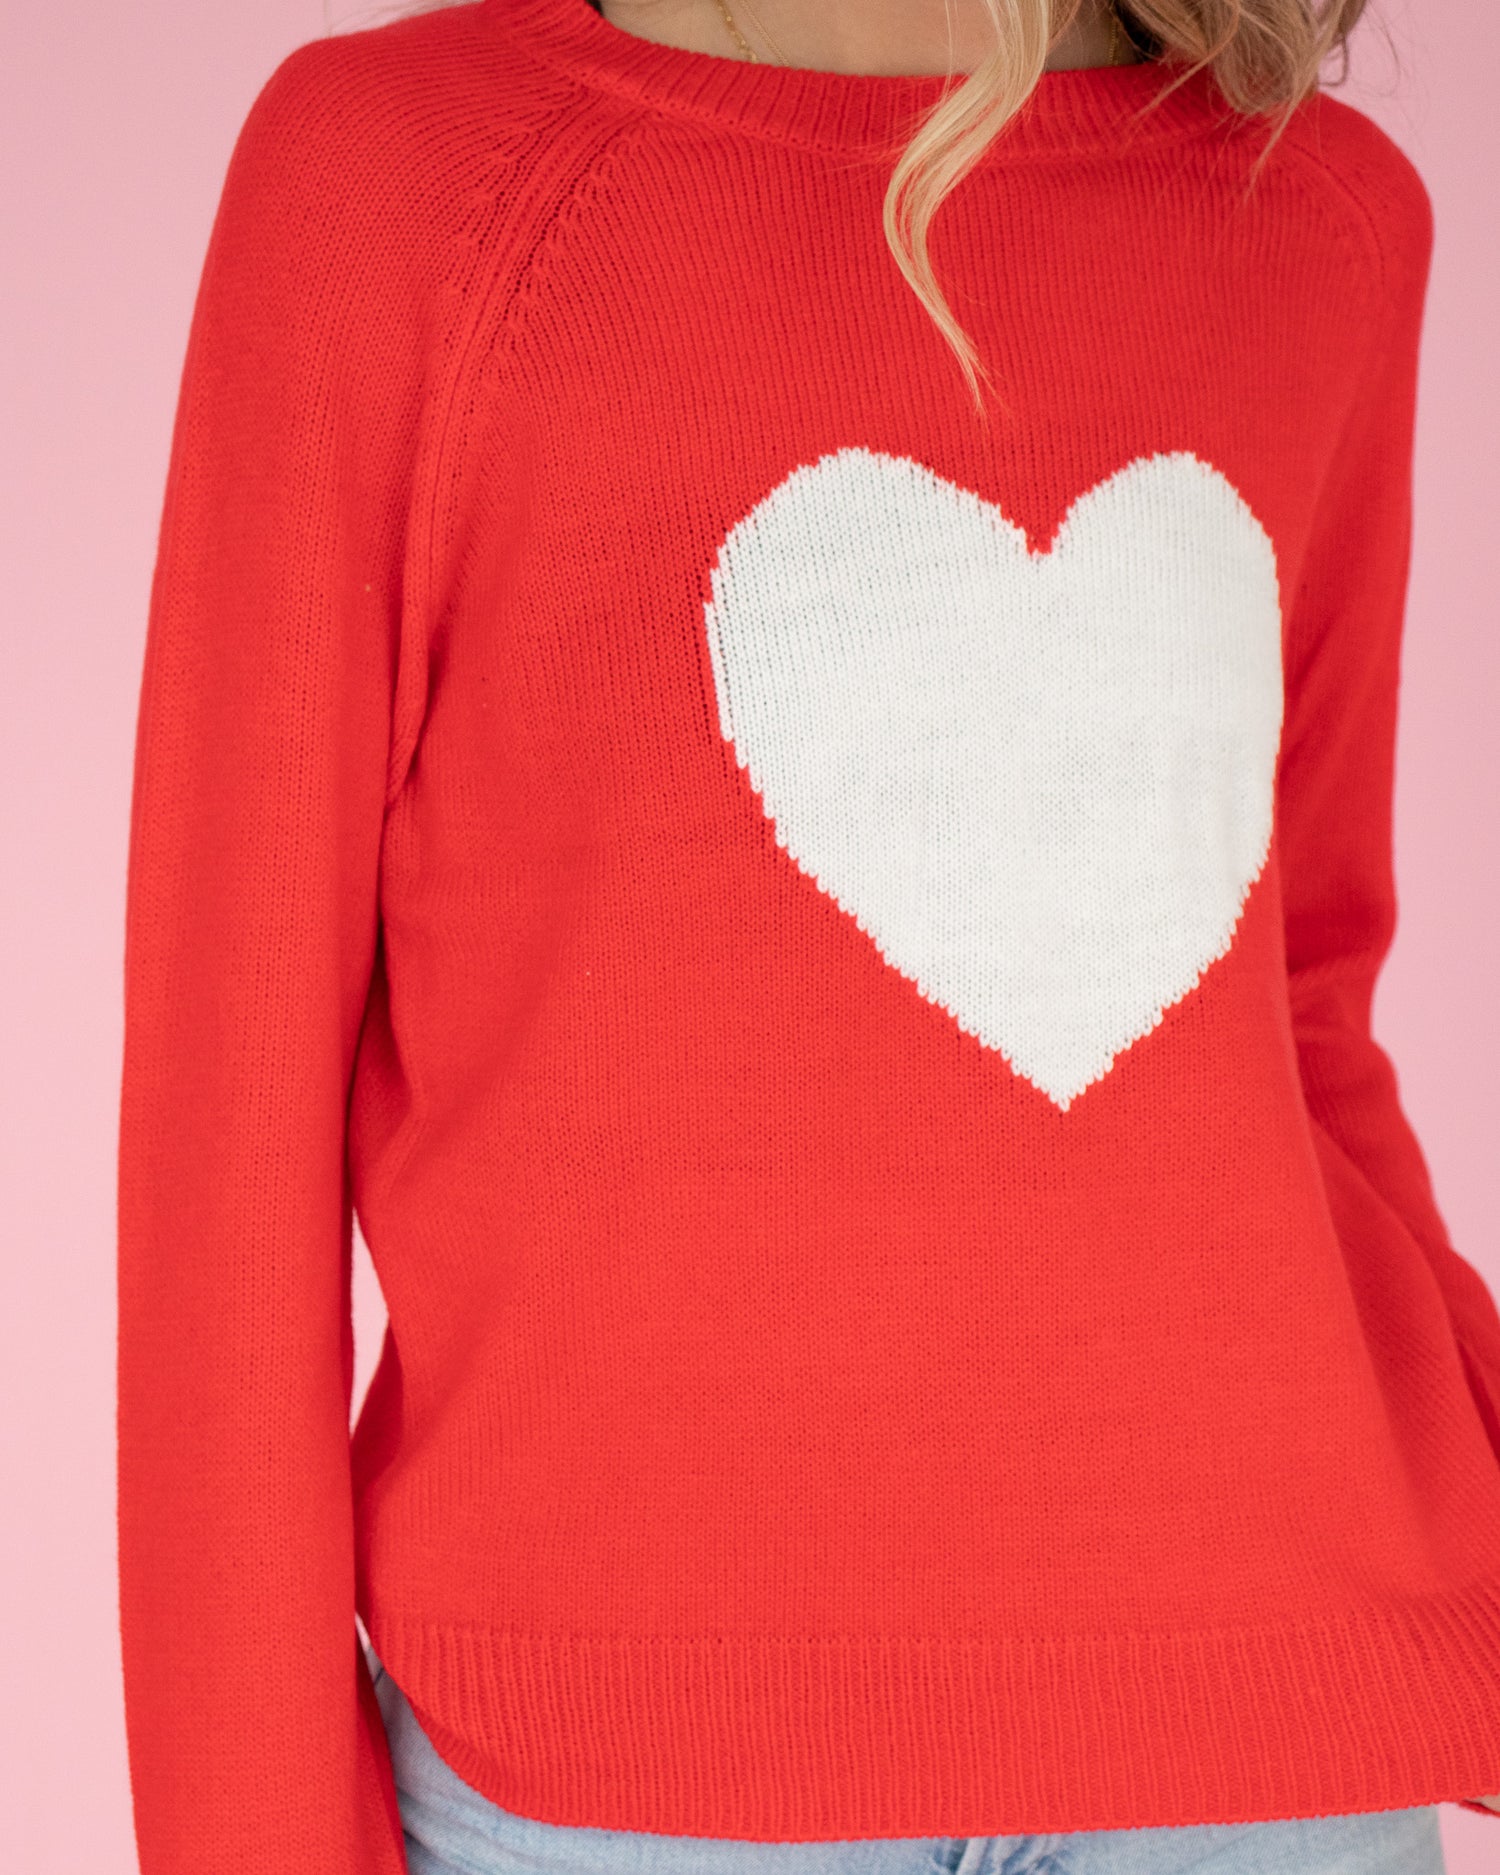 All My Heart Sweater